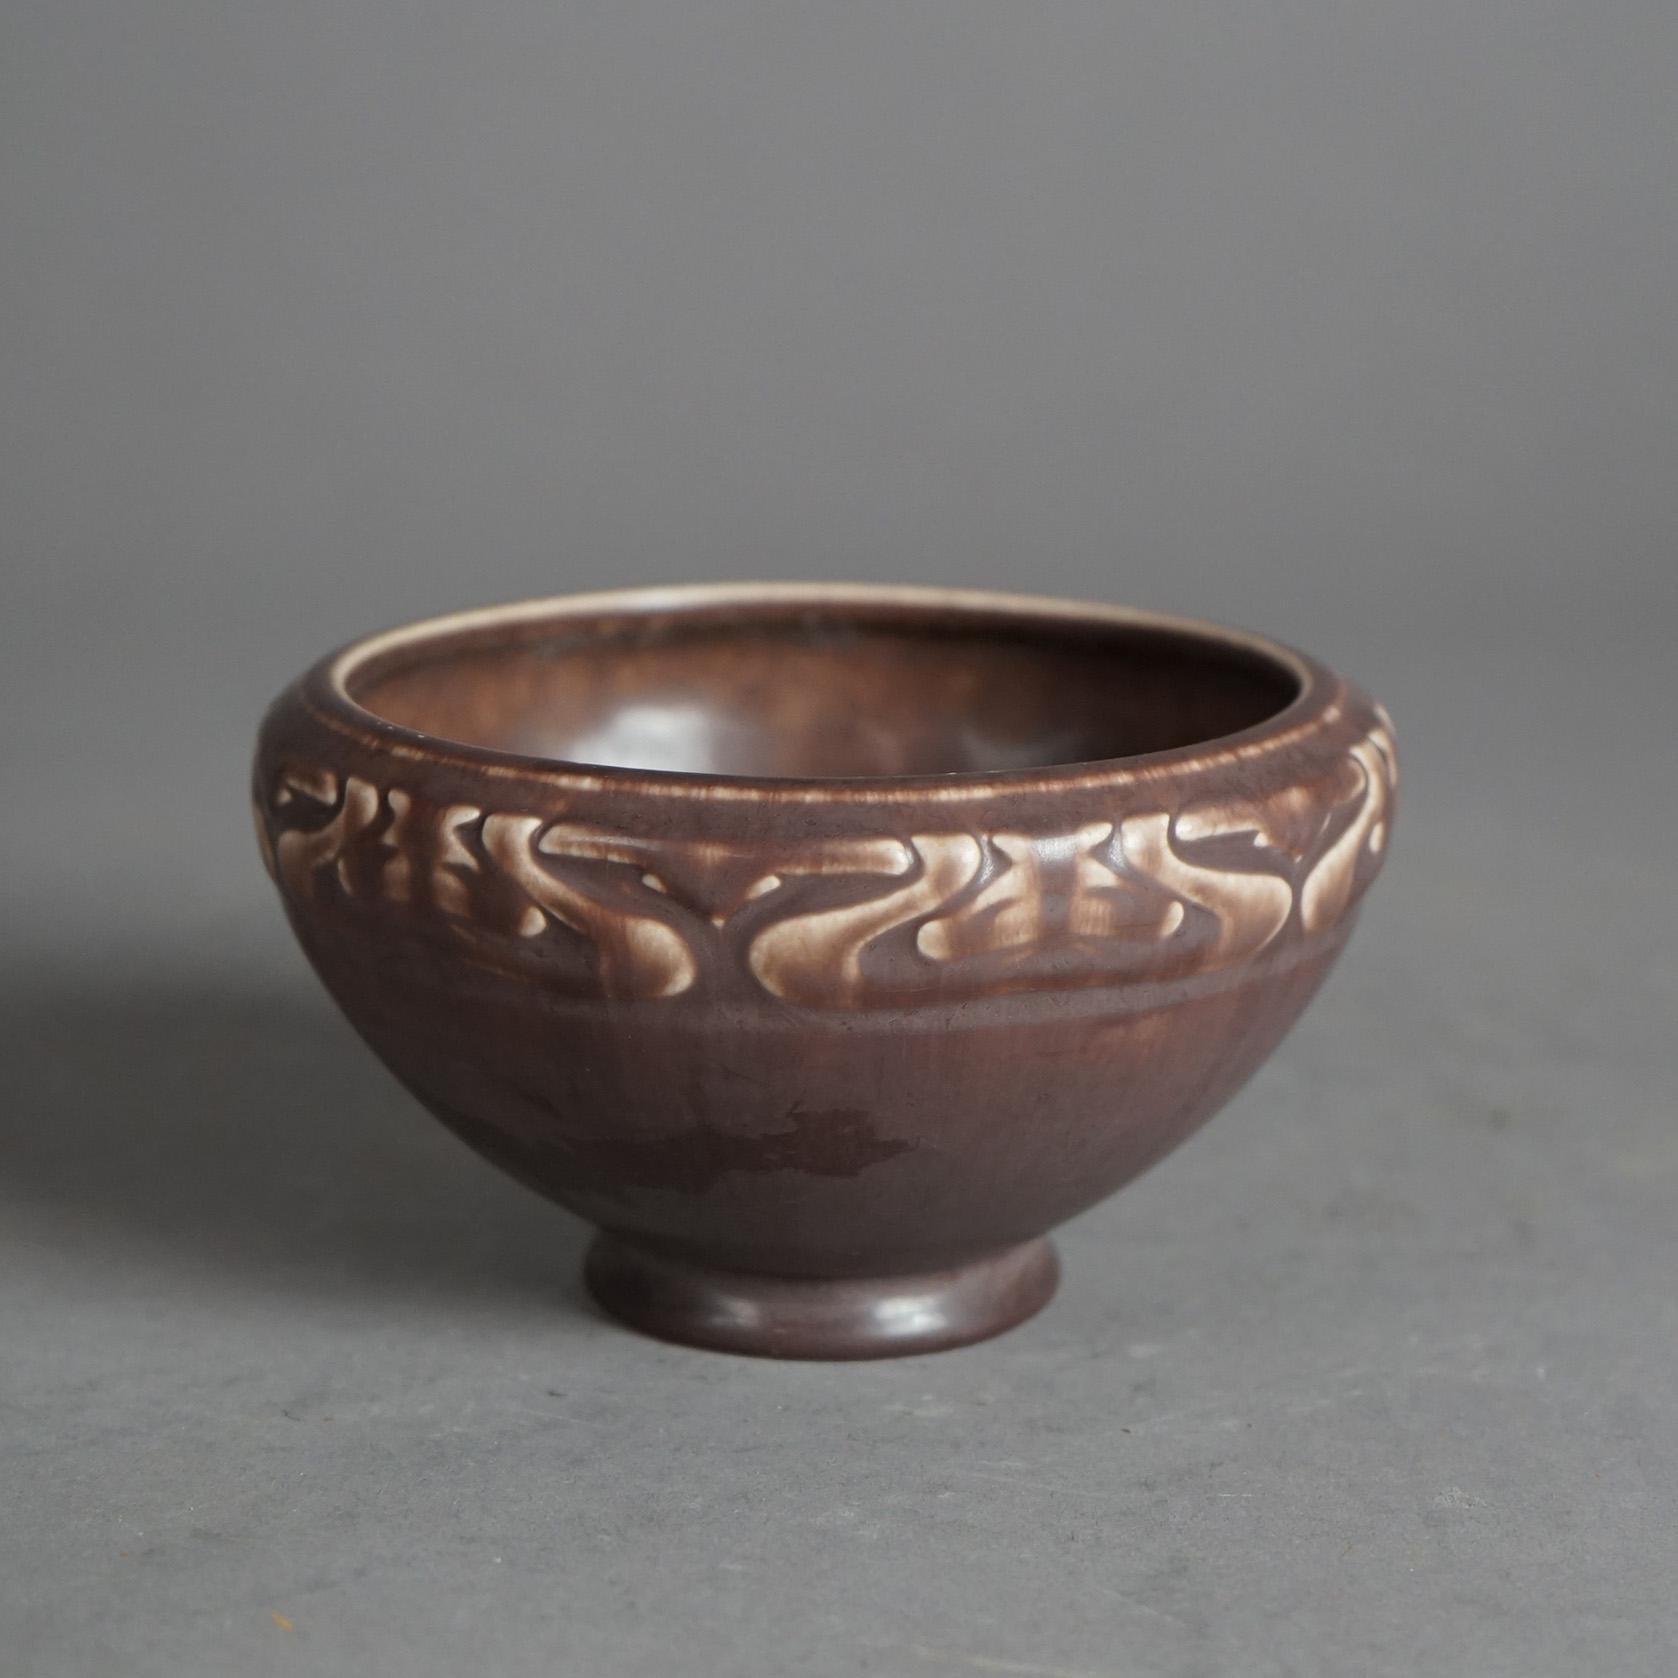 An antique Arts and Crafts bowl by Rookwood offers tapered form with stylized foliate band and maker mark on base as photographed, c1921

Measures- 3''H x 5.25''W x 5.25''D